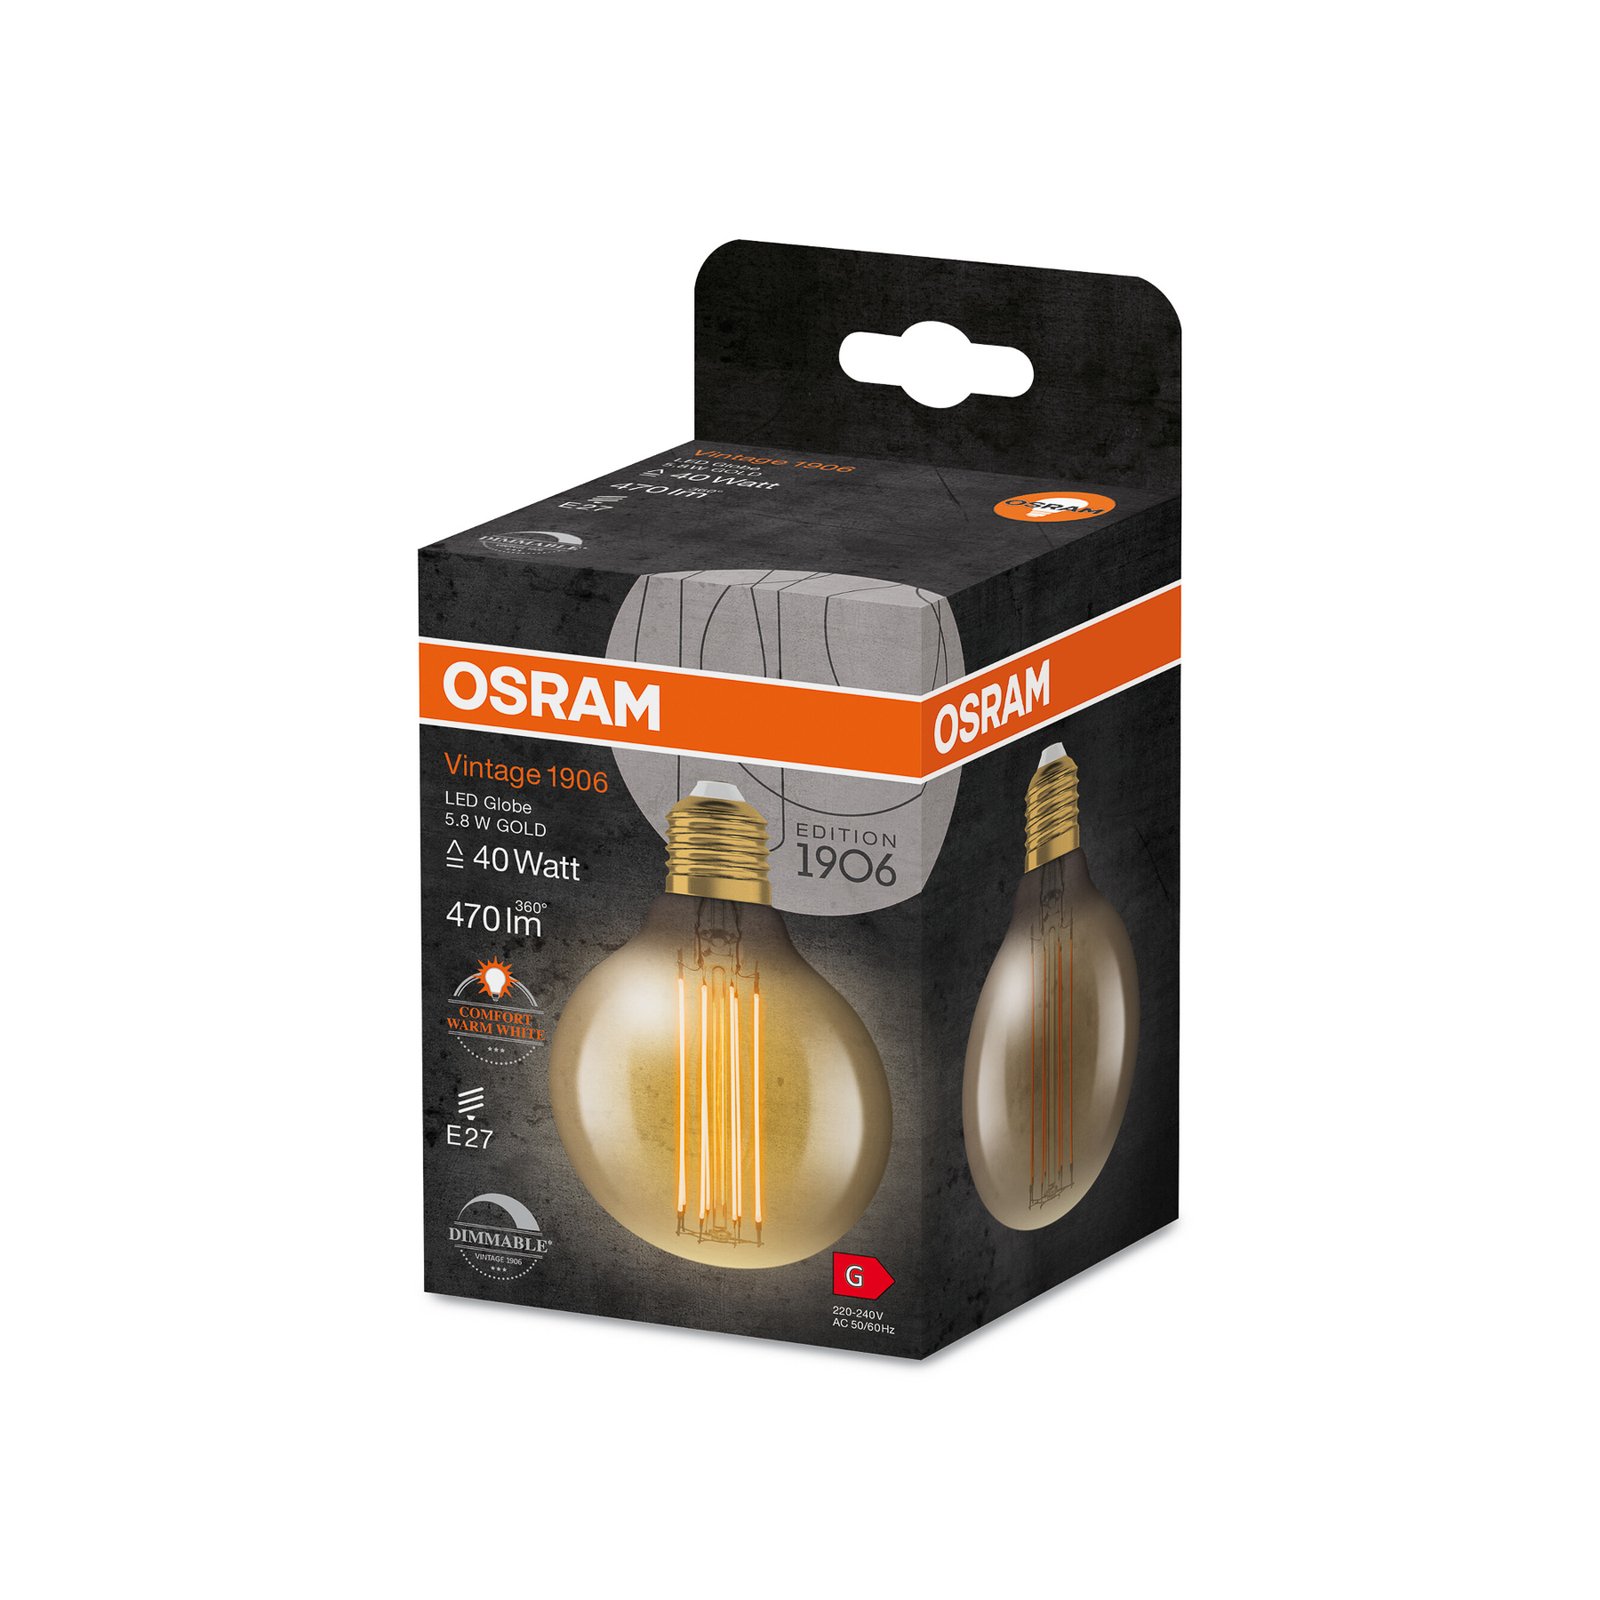 OSRAM LED Vintage 1906, G80, E27, 5.8 W, gold, 2,200 K, dimmable.